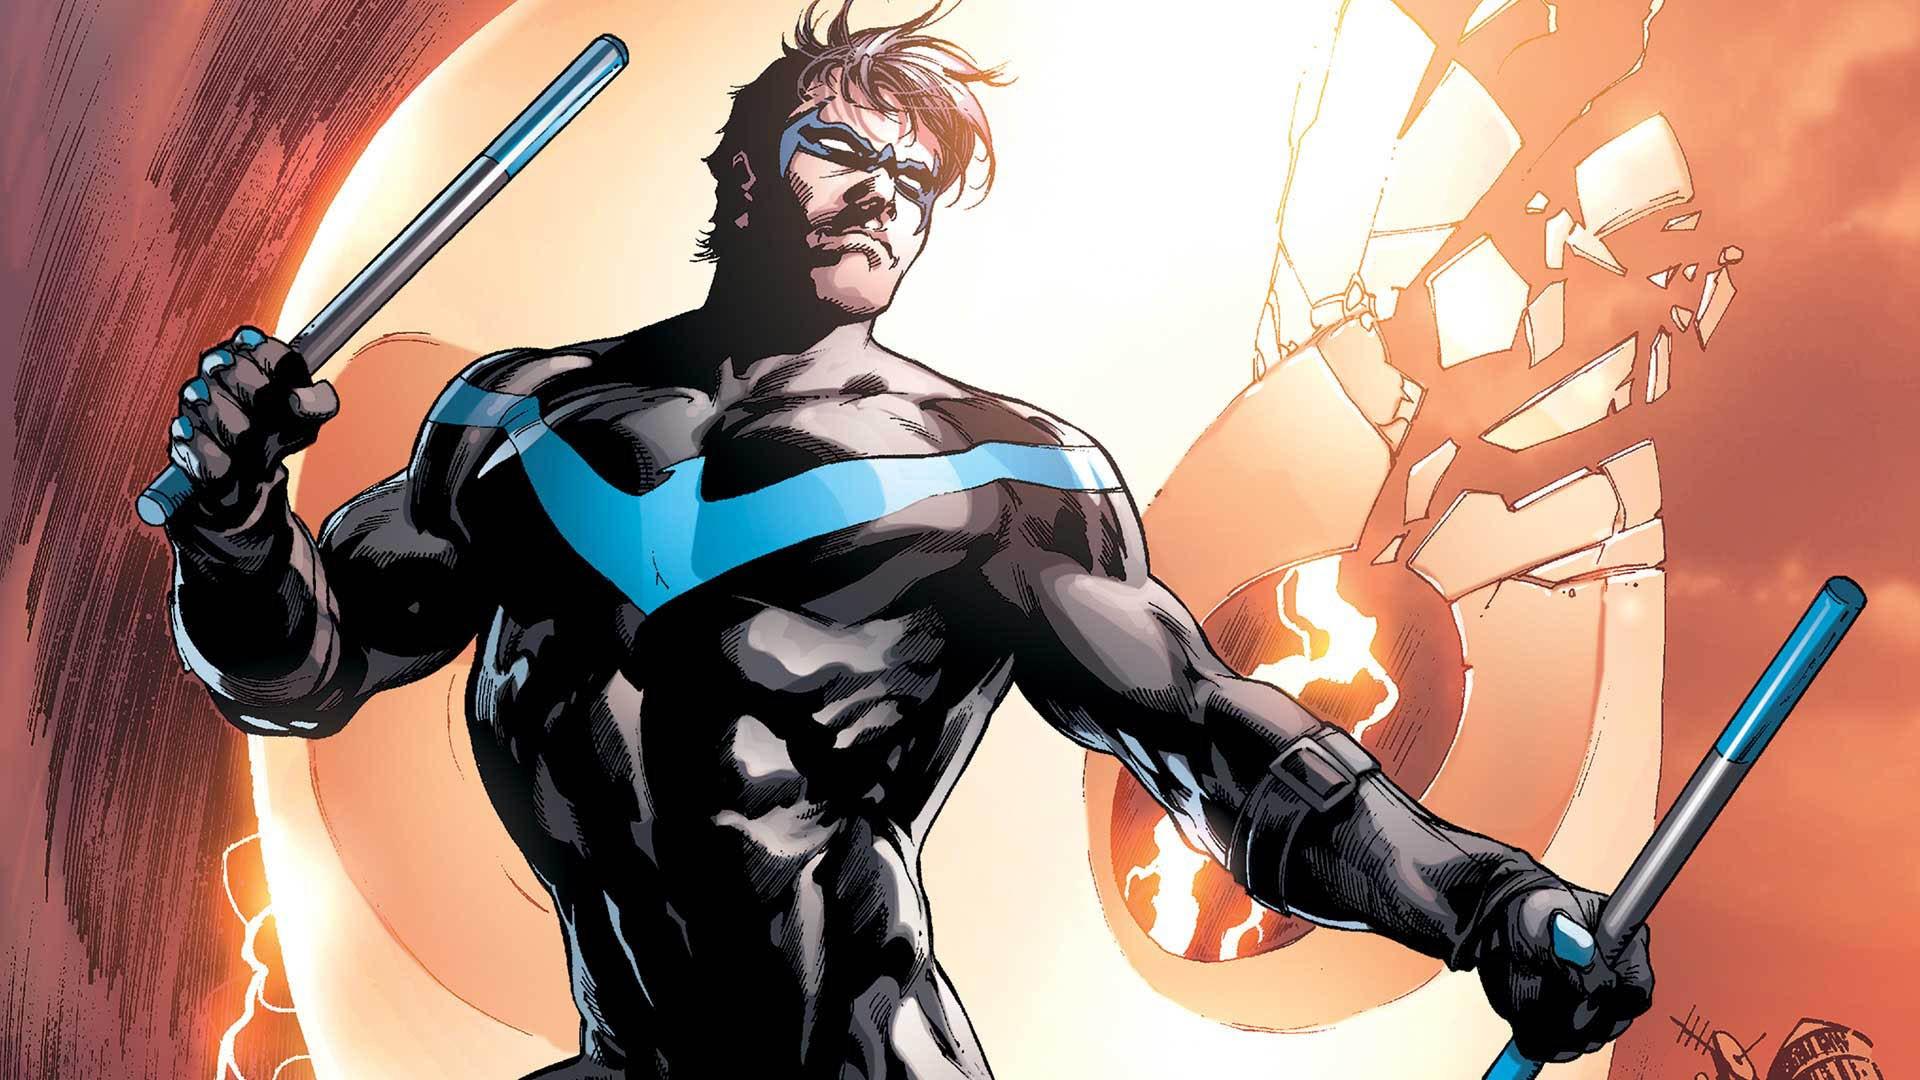 Titans set photo show off Nightwing and Ravager